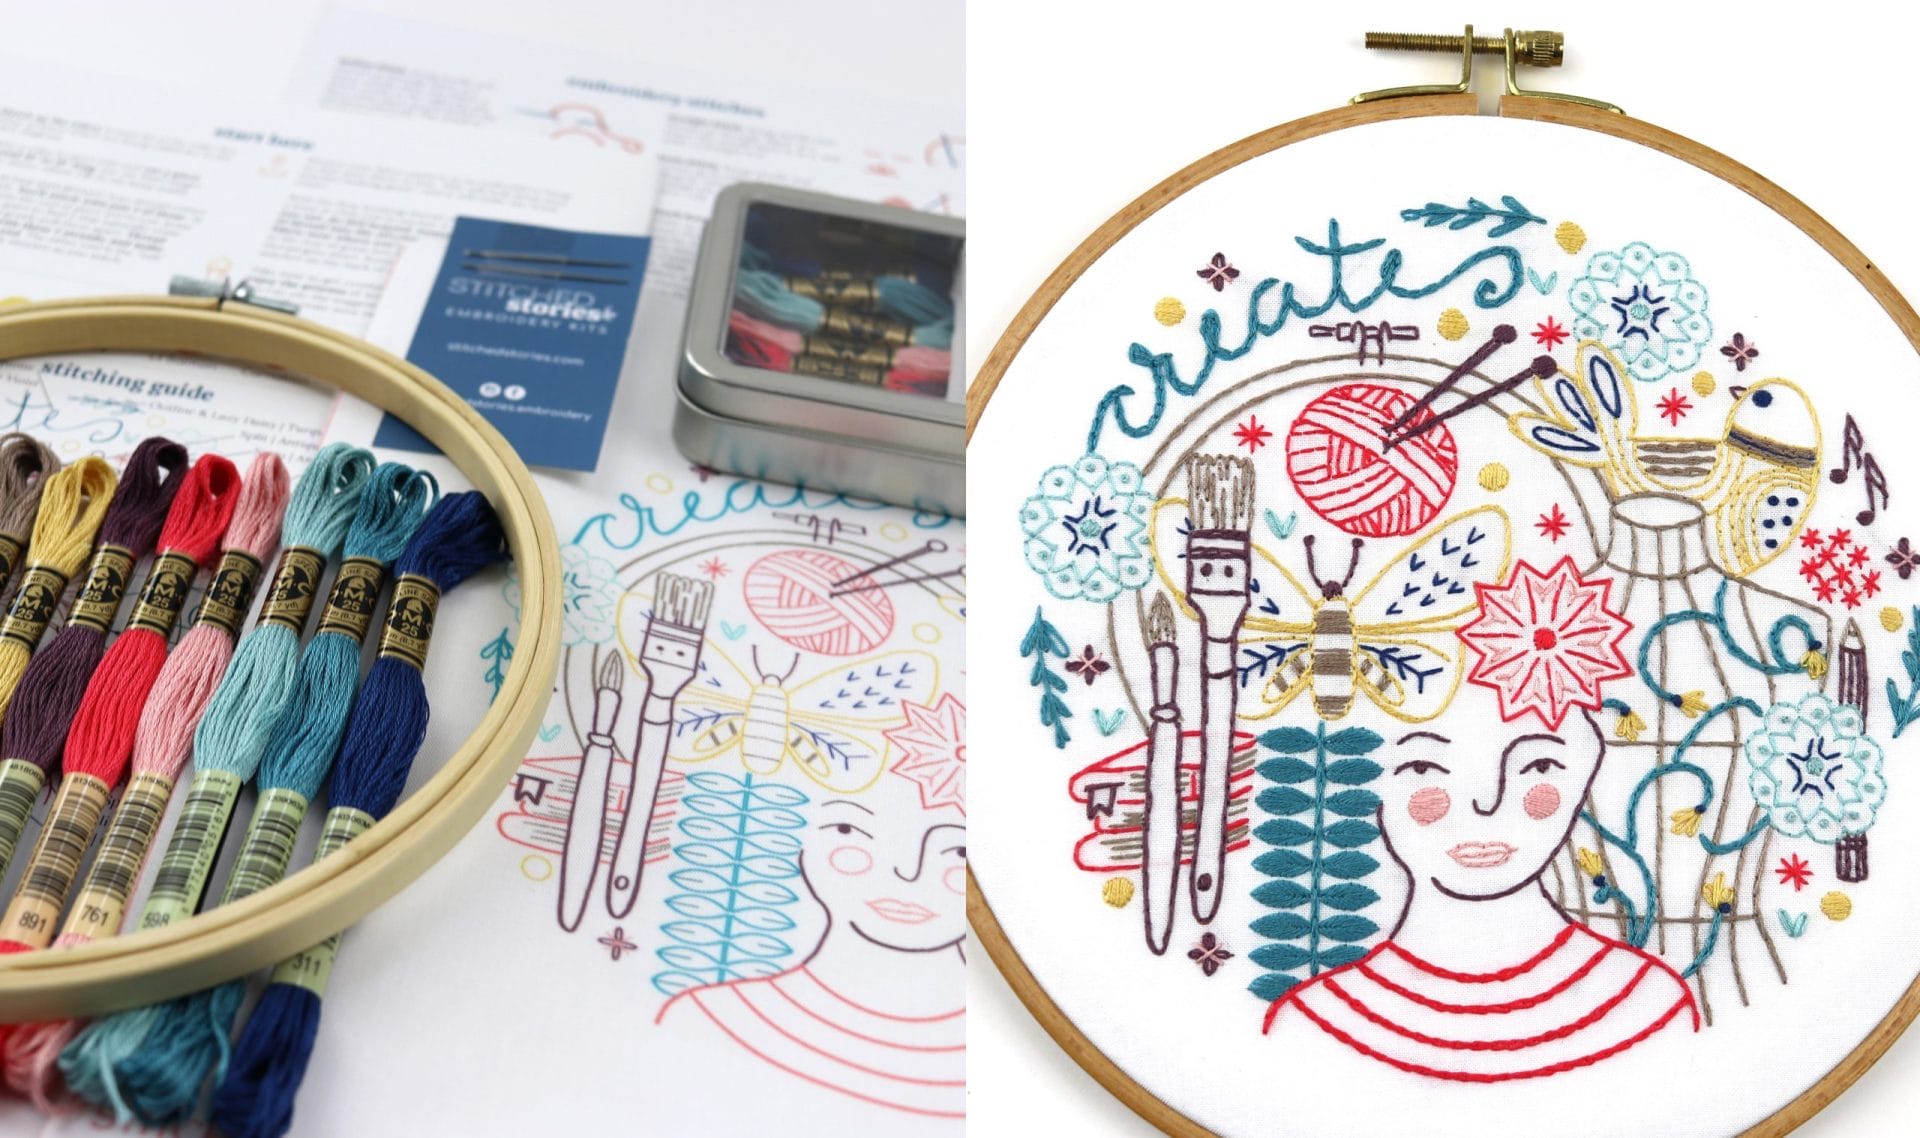 creativity-themed, all-in-one embroidery kit and embroidery hoop art 